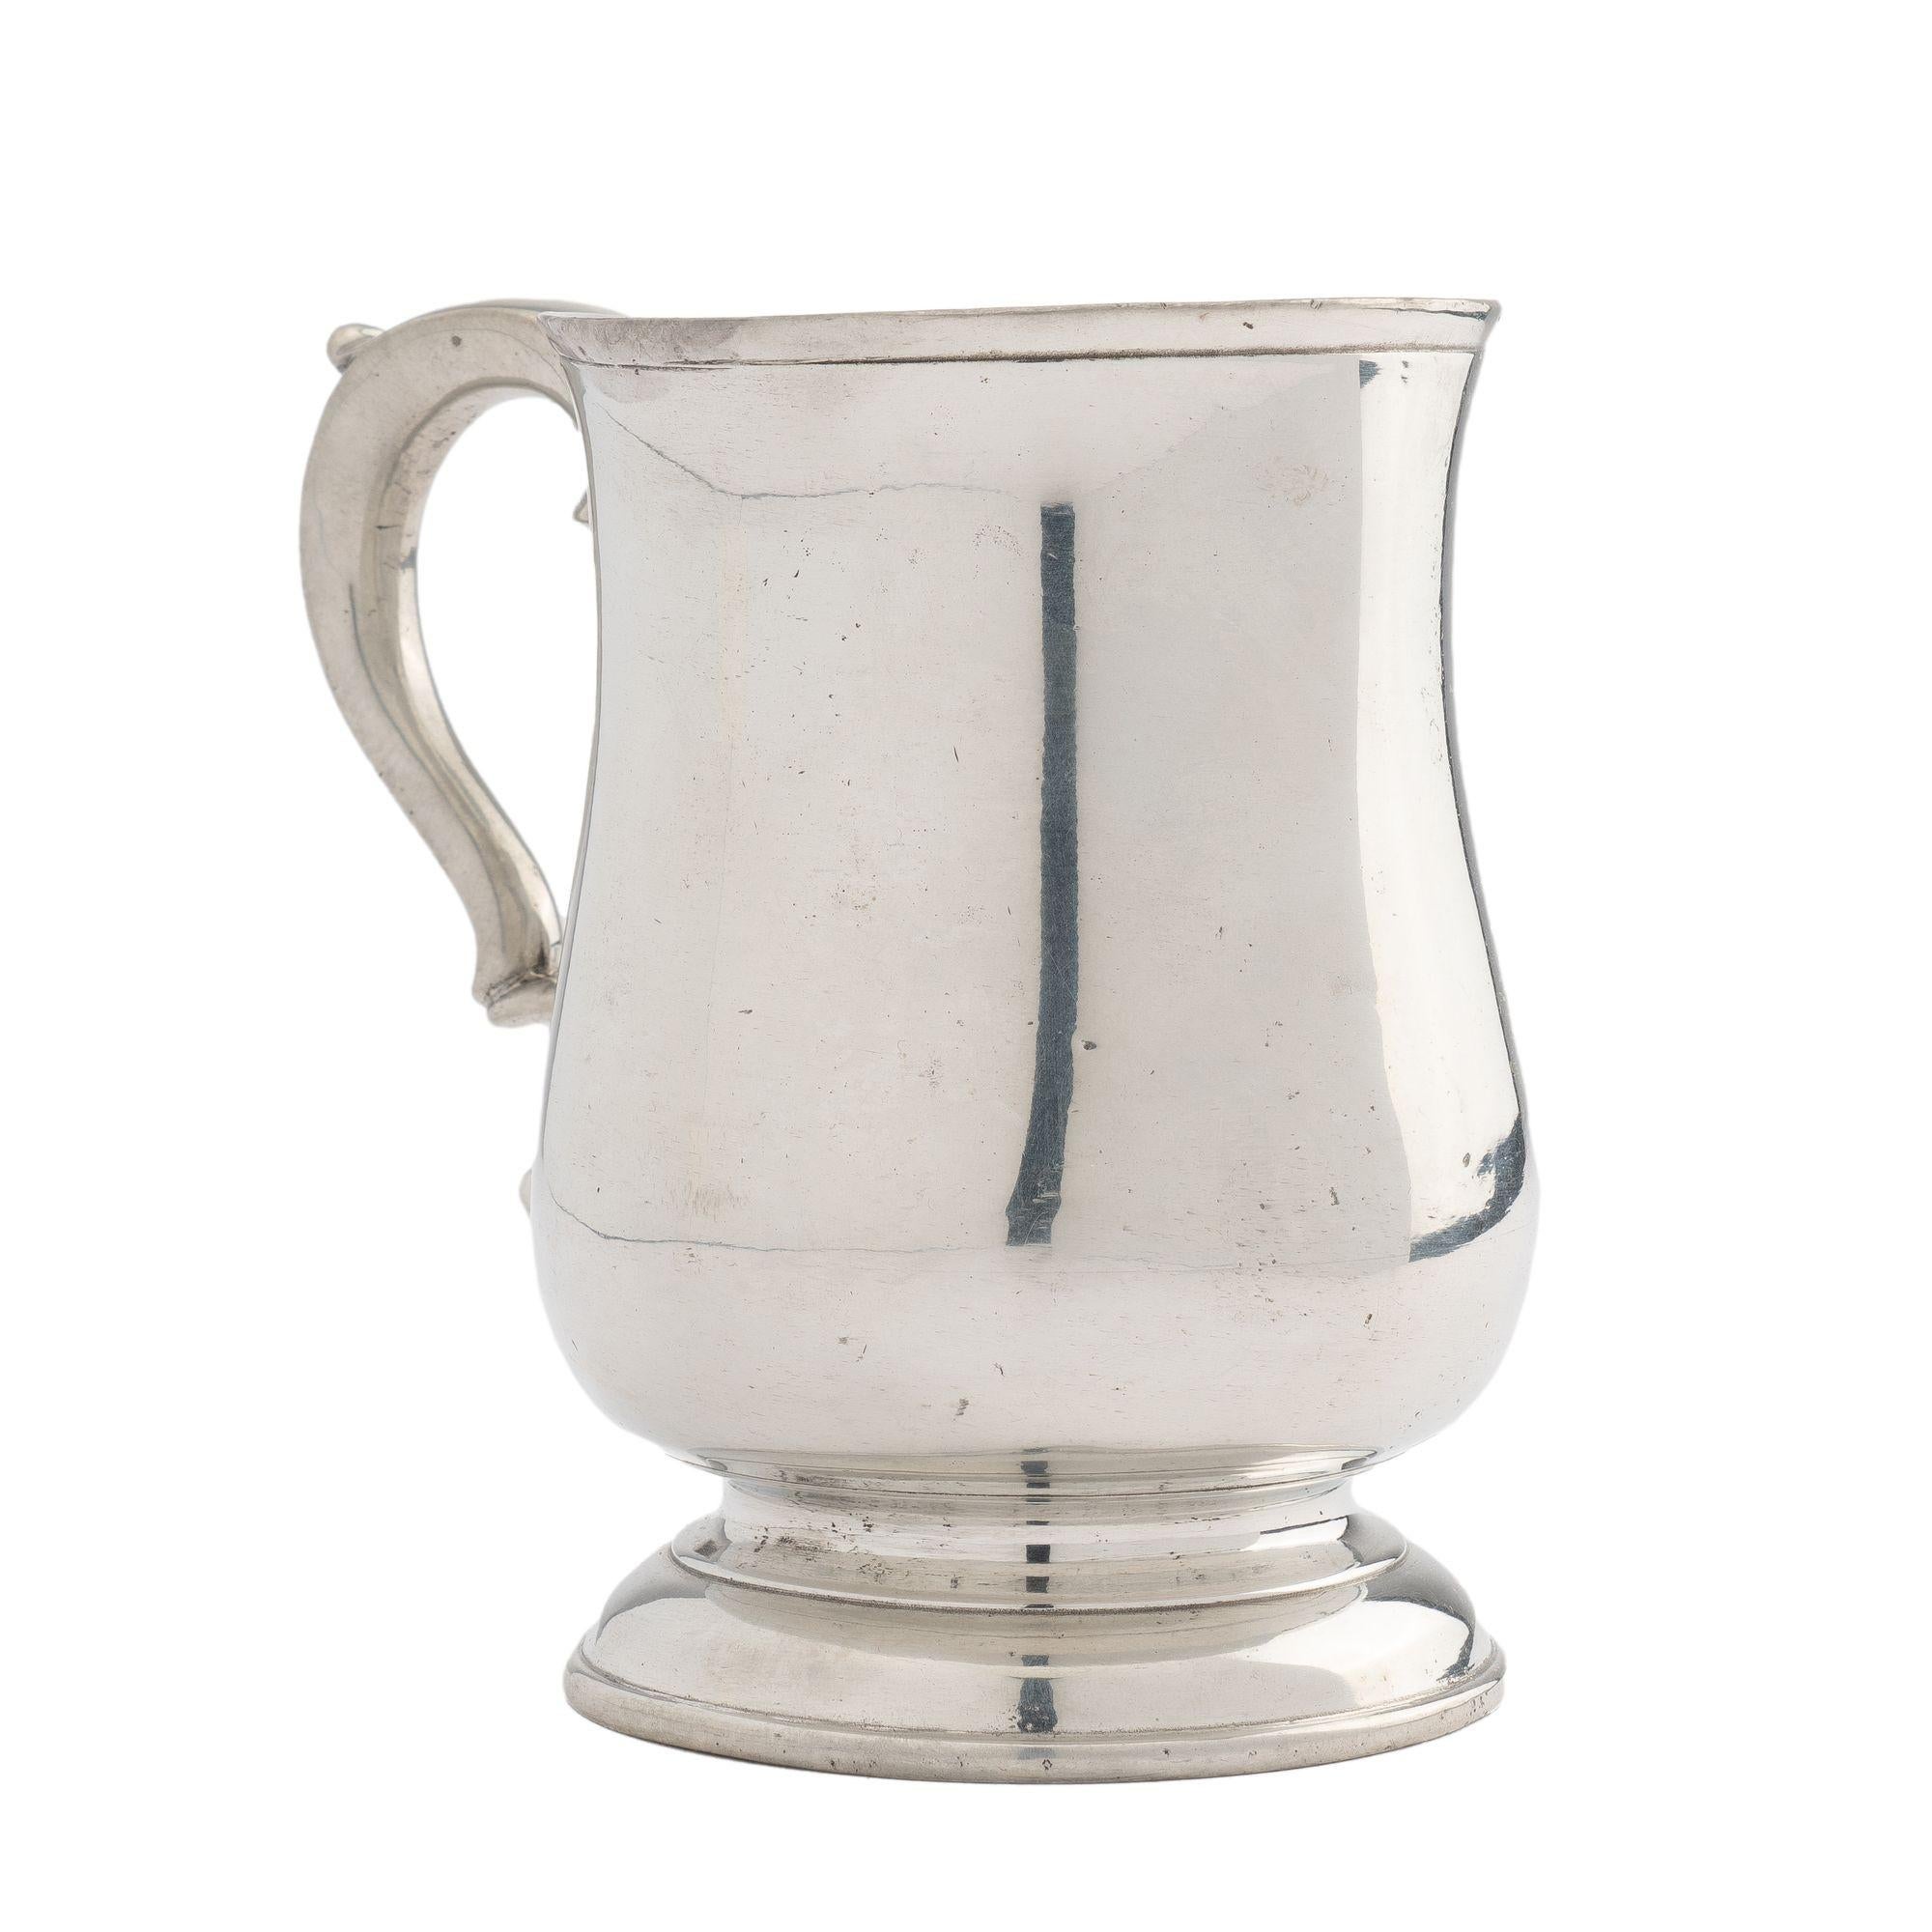 Watts & Harton Tulip Shaped Polished Pewter Mug with Applied Scroll Handle, 1830 For Sale 1